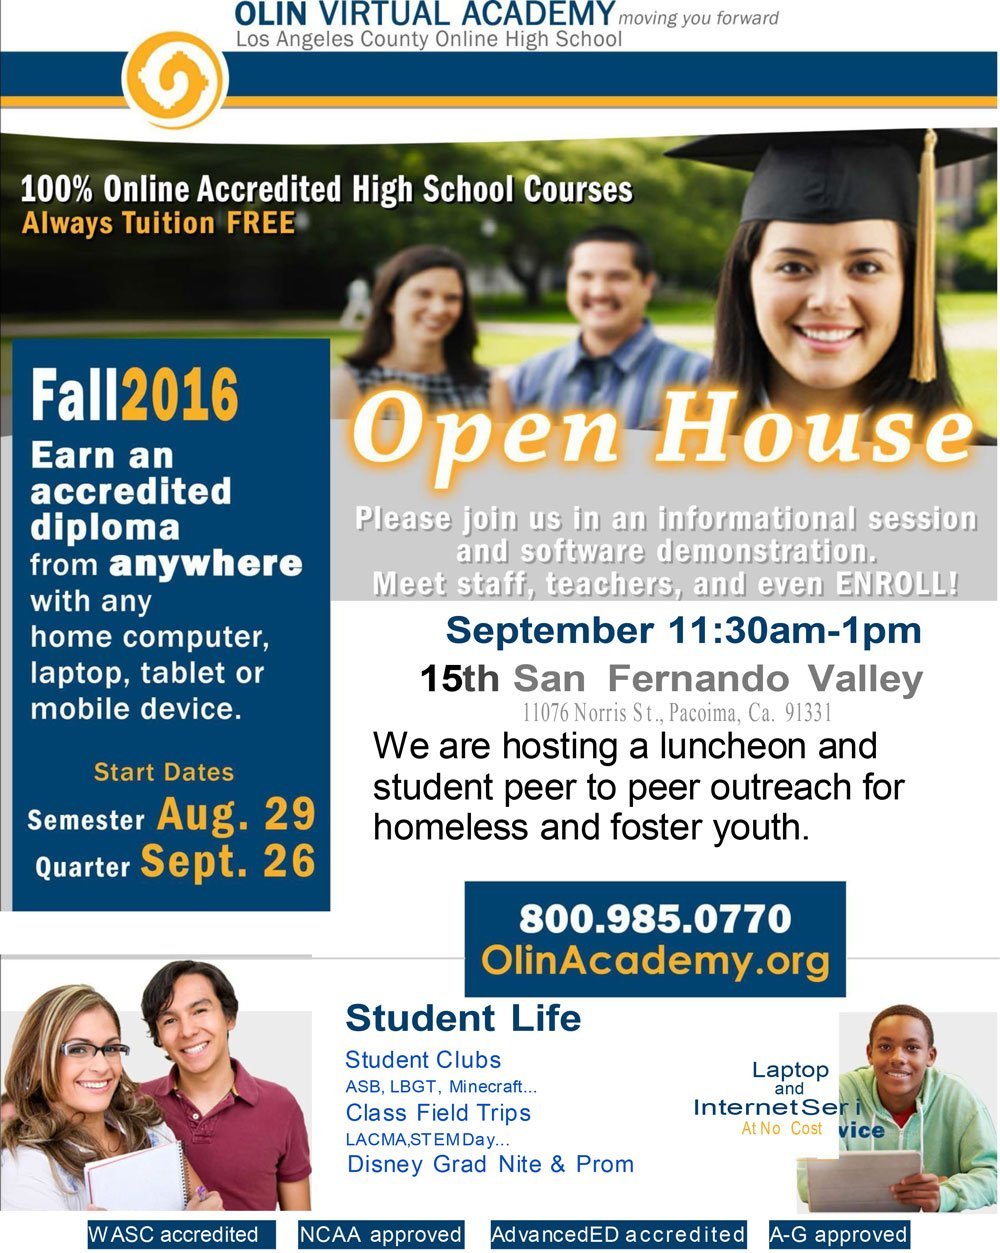 LA County Online High School – Homeless Student Outreach Luncheon